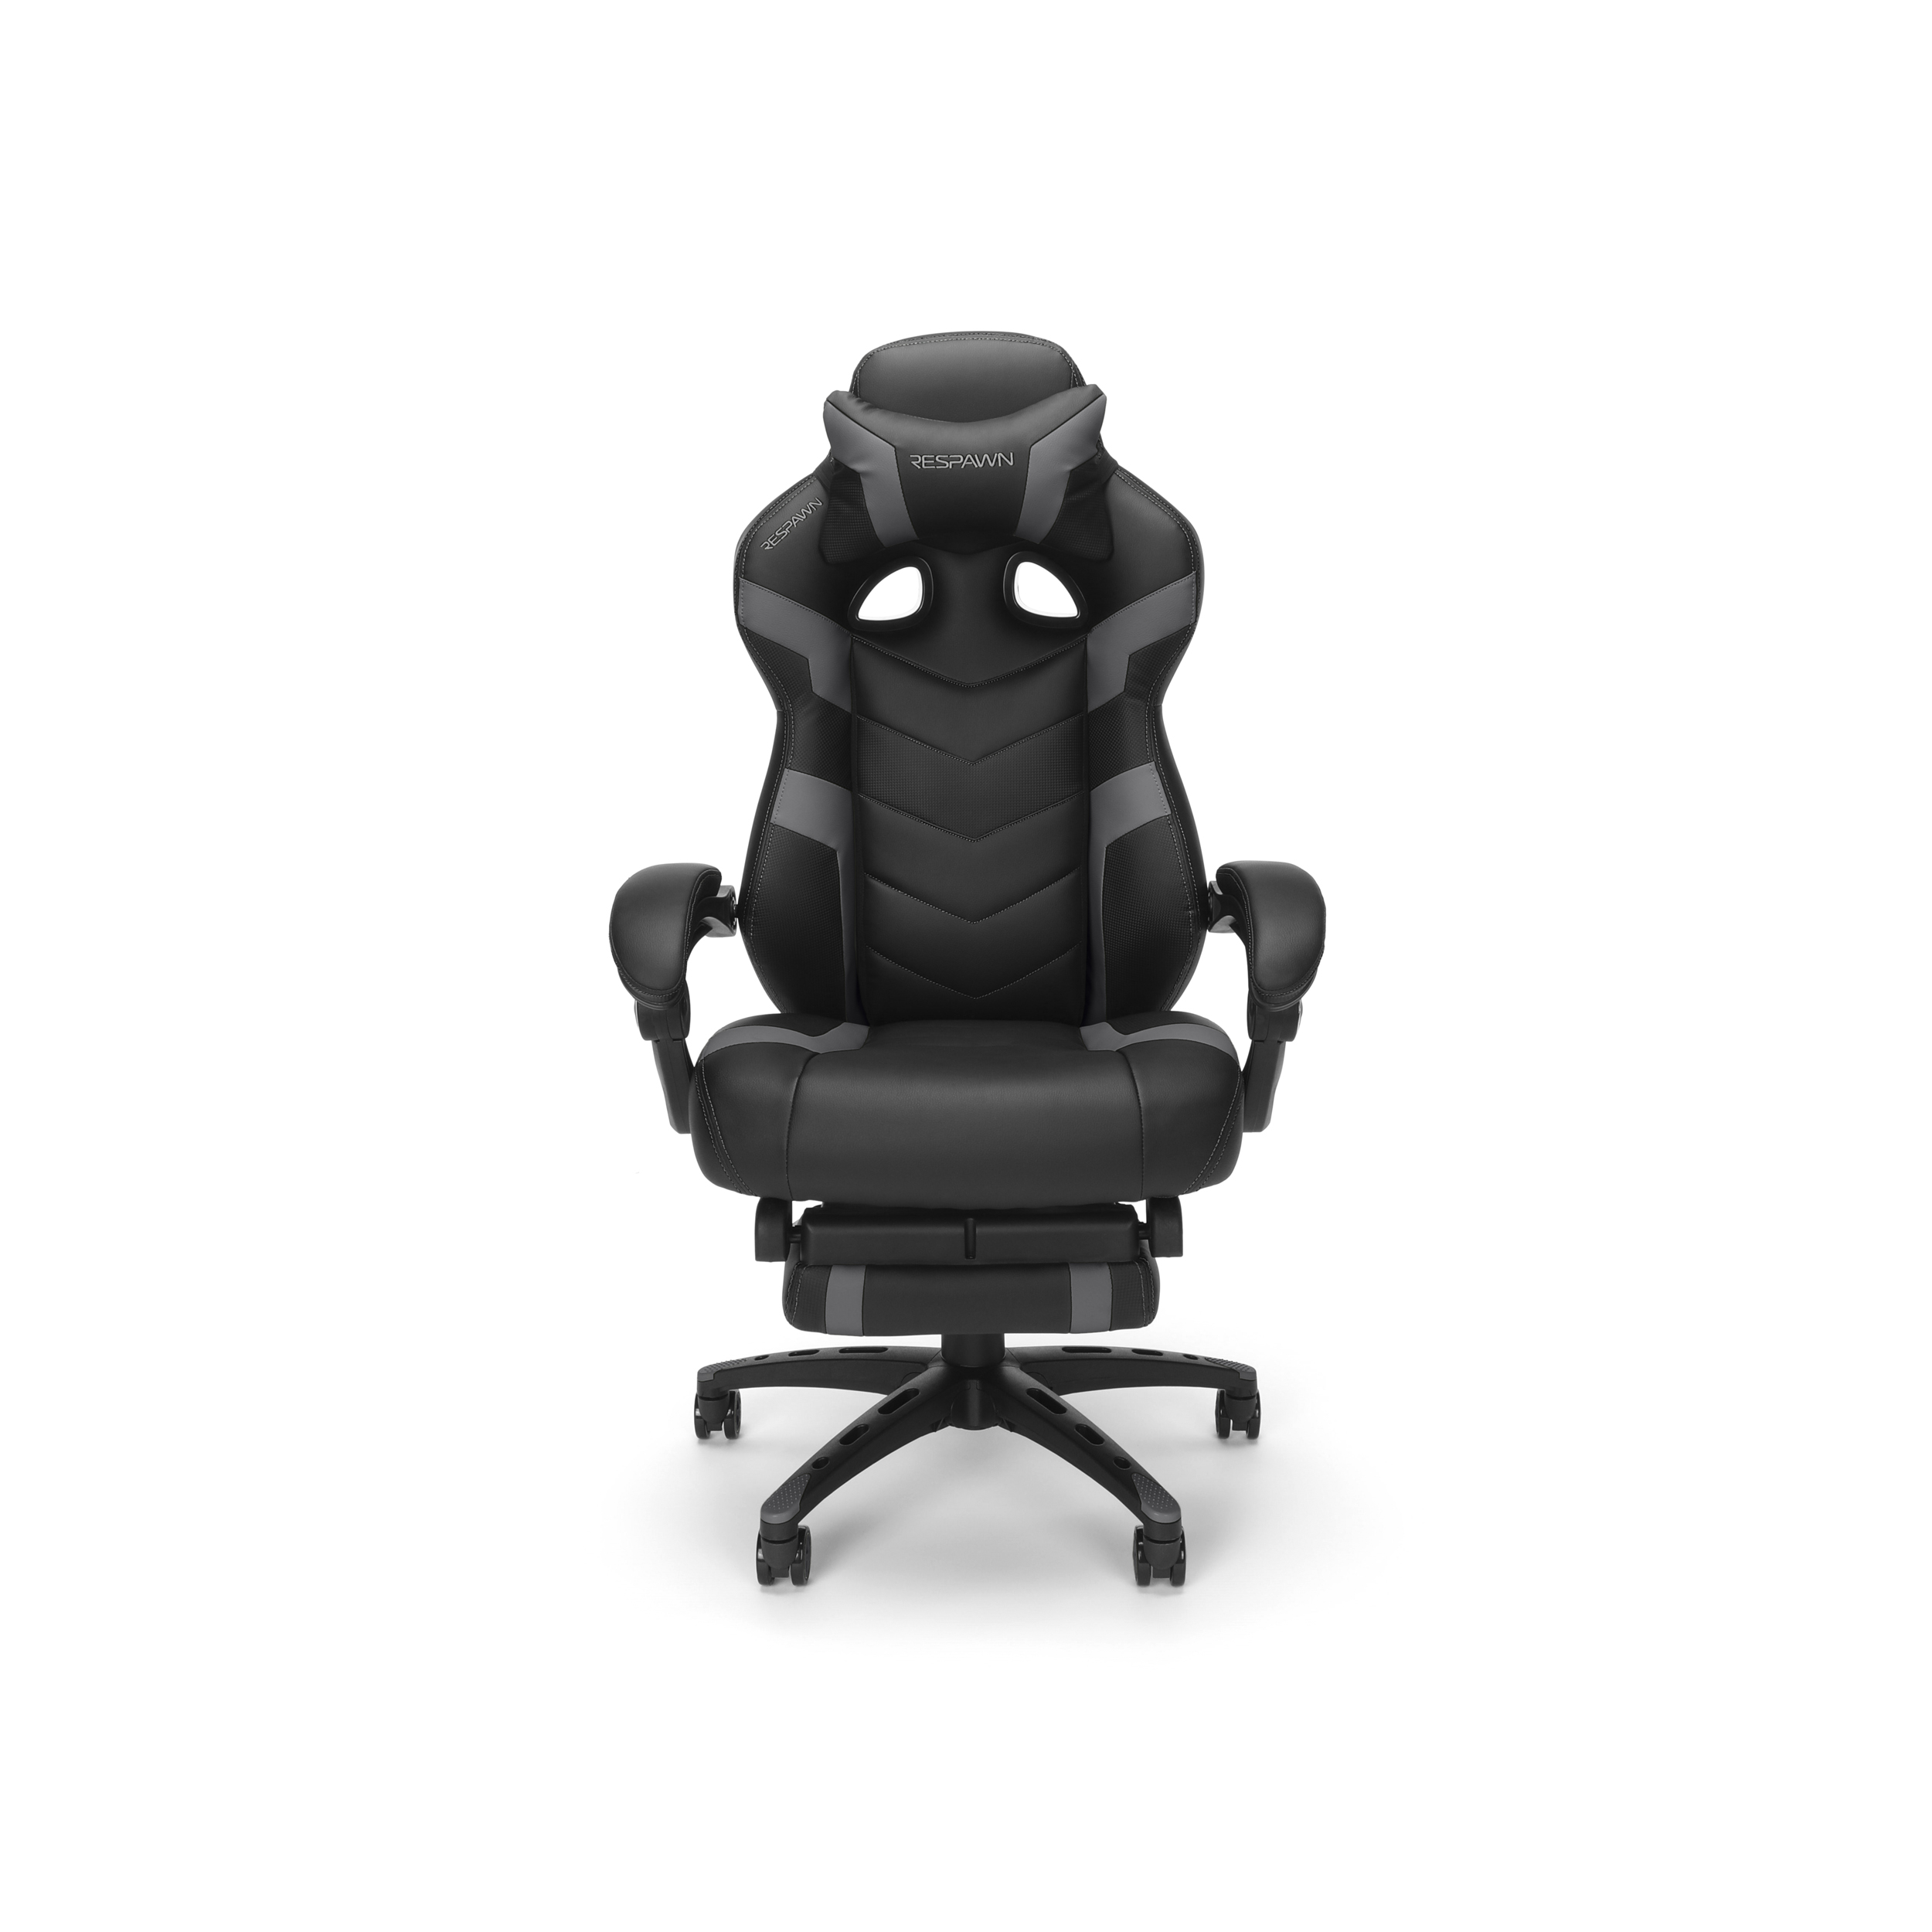 RESPAWN 110 Pro Gaming Chair - Gaming Chair with Footrest, Reclining Gaming Chair, Video Gaming Computer Desk Chair, Adjustable Desk Chair, Gaming Chairs For Adults With Headrest Pillow - Grey - image 3 of 10